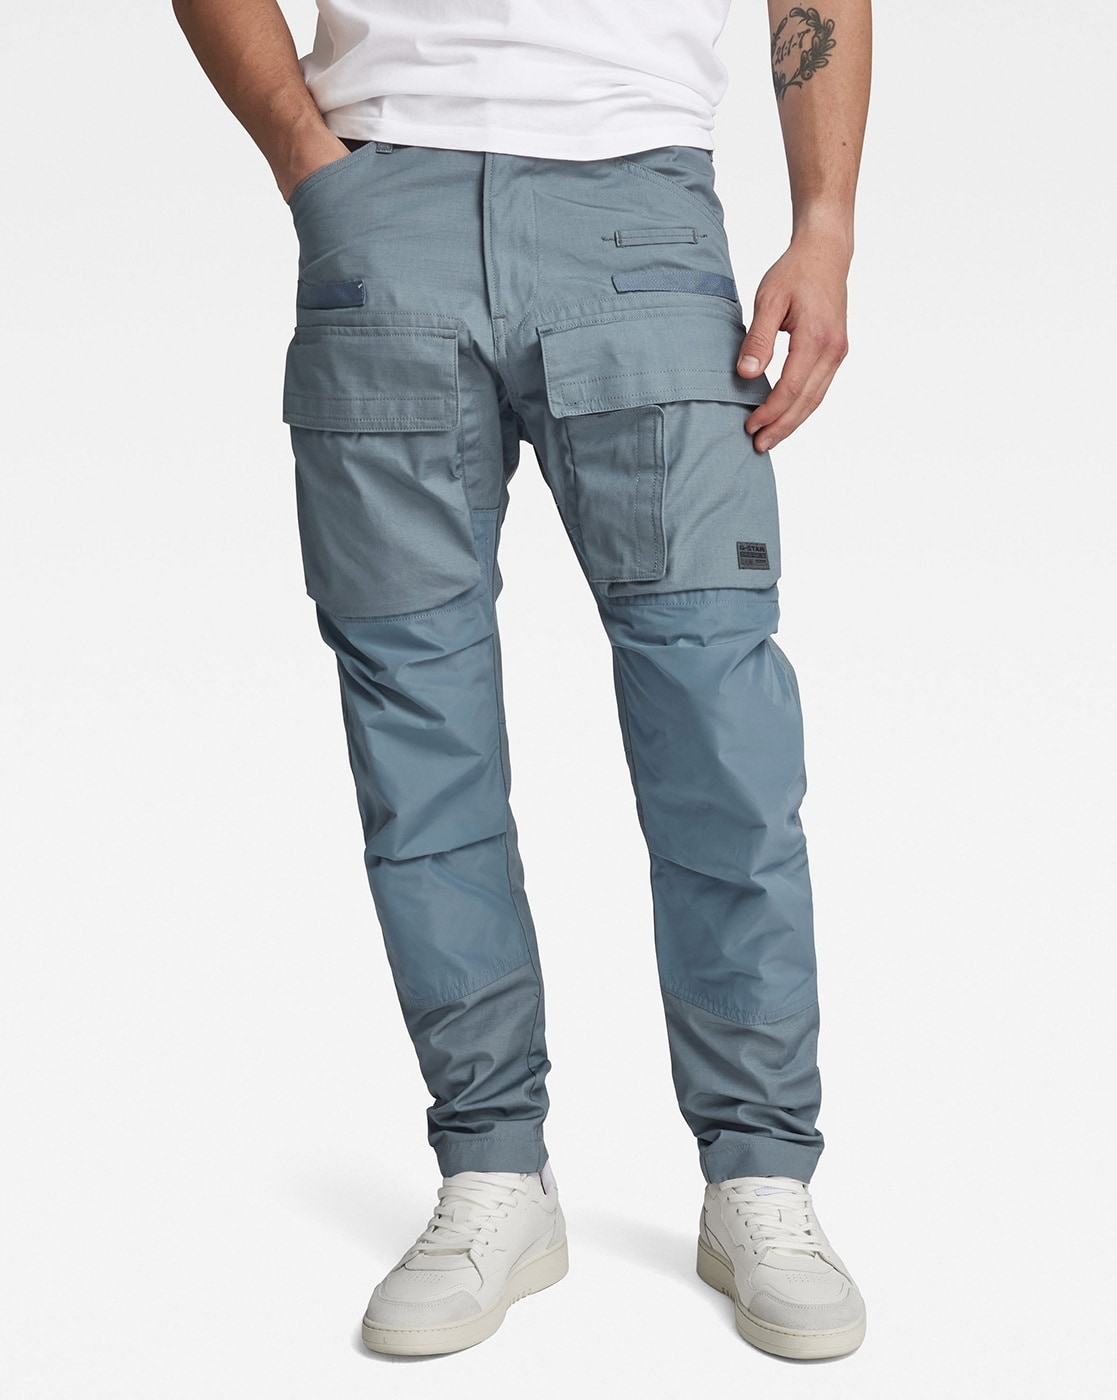 Gstar raw Rs 1300 Cargo pant (90% off)😳😳 Chill guys..thats actually the  replica or alternative from @snitch.co.in . Take the first portion… |  Instagram